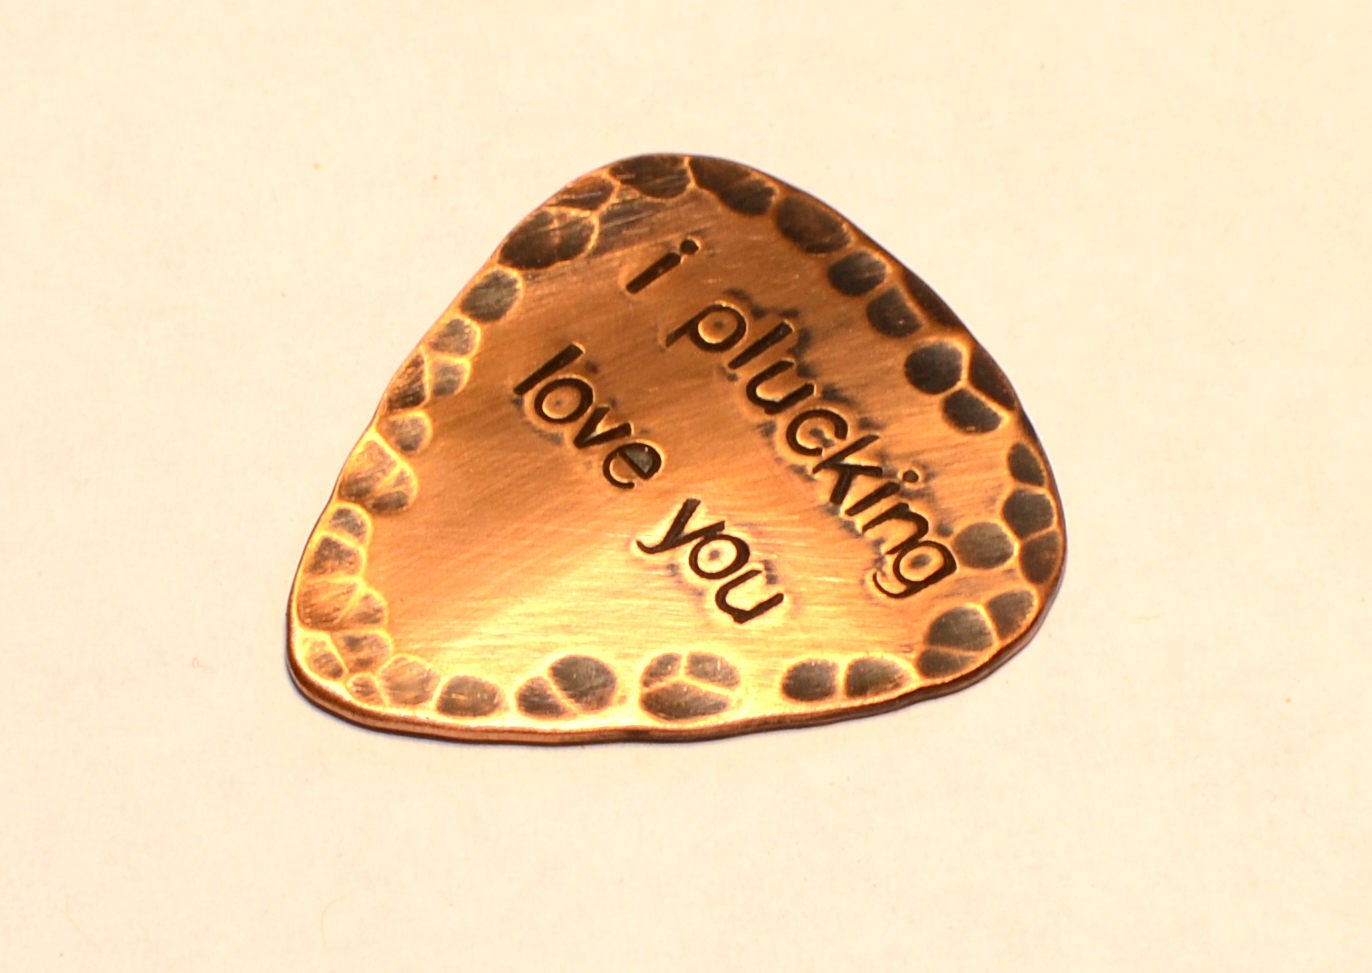 Rustic I Plucking Love You Copper Guitar Pick with Patina and Hammered patterning